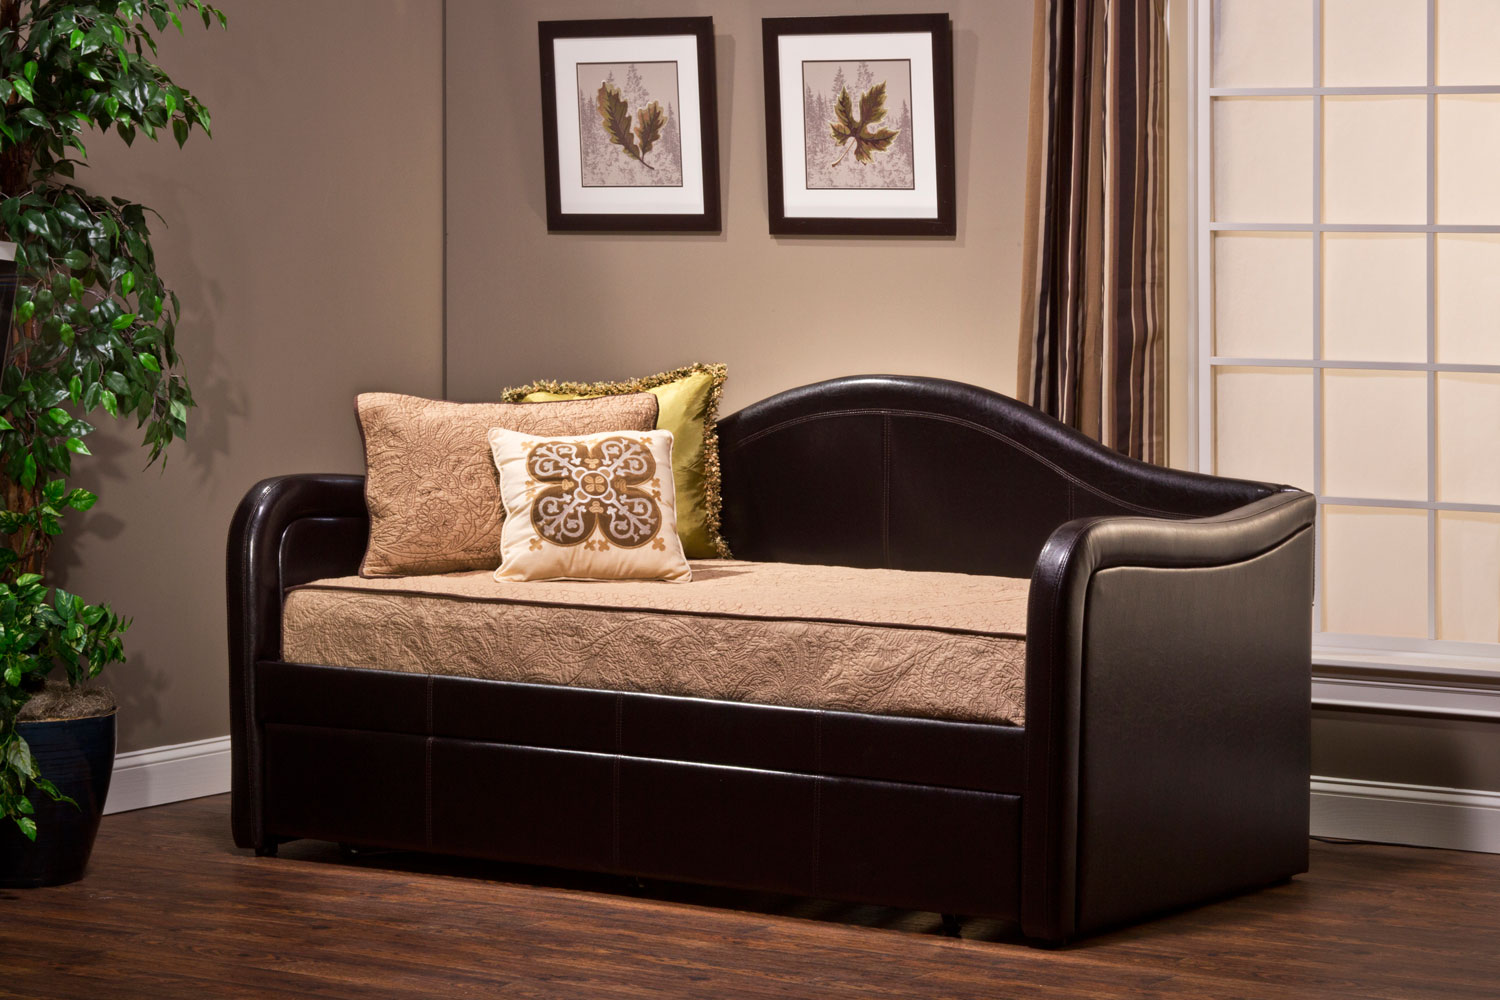 Hillsdale Brenton Daybed with Pull Out Trundle - Brown Vinyl